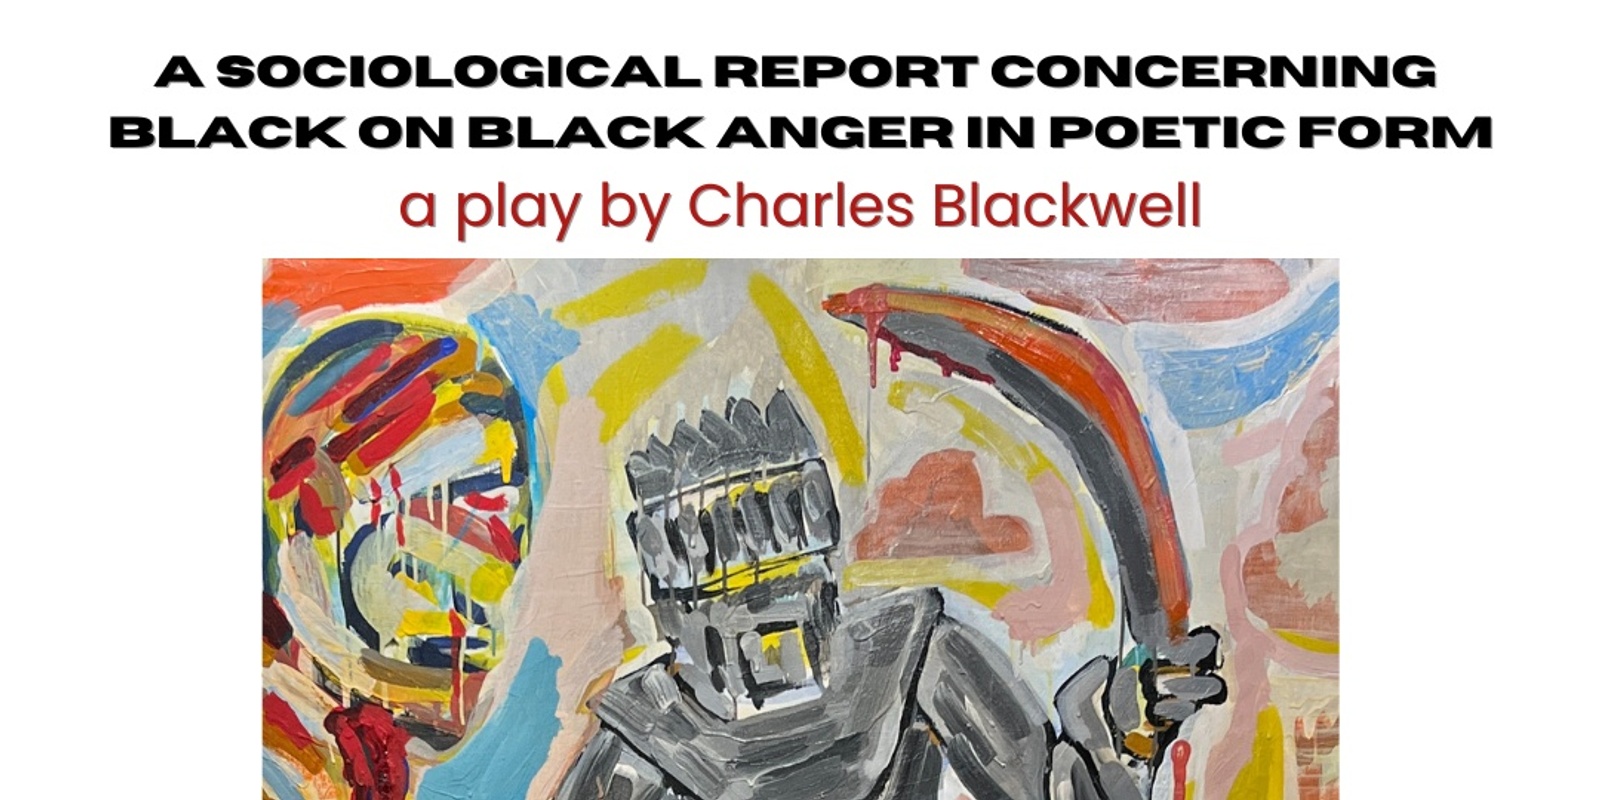 Banner image for Charles Blackwell's "A Sociological Report Concerning Black on Black Anger in Poetic Form"